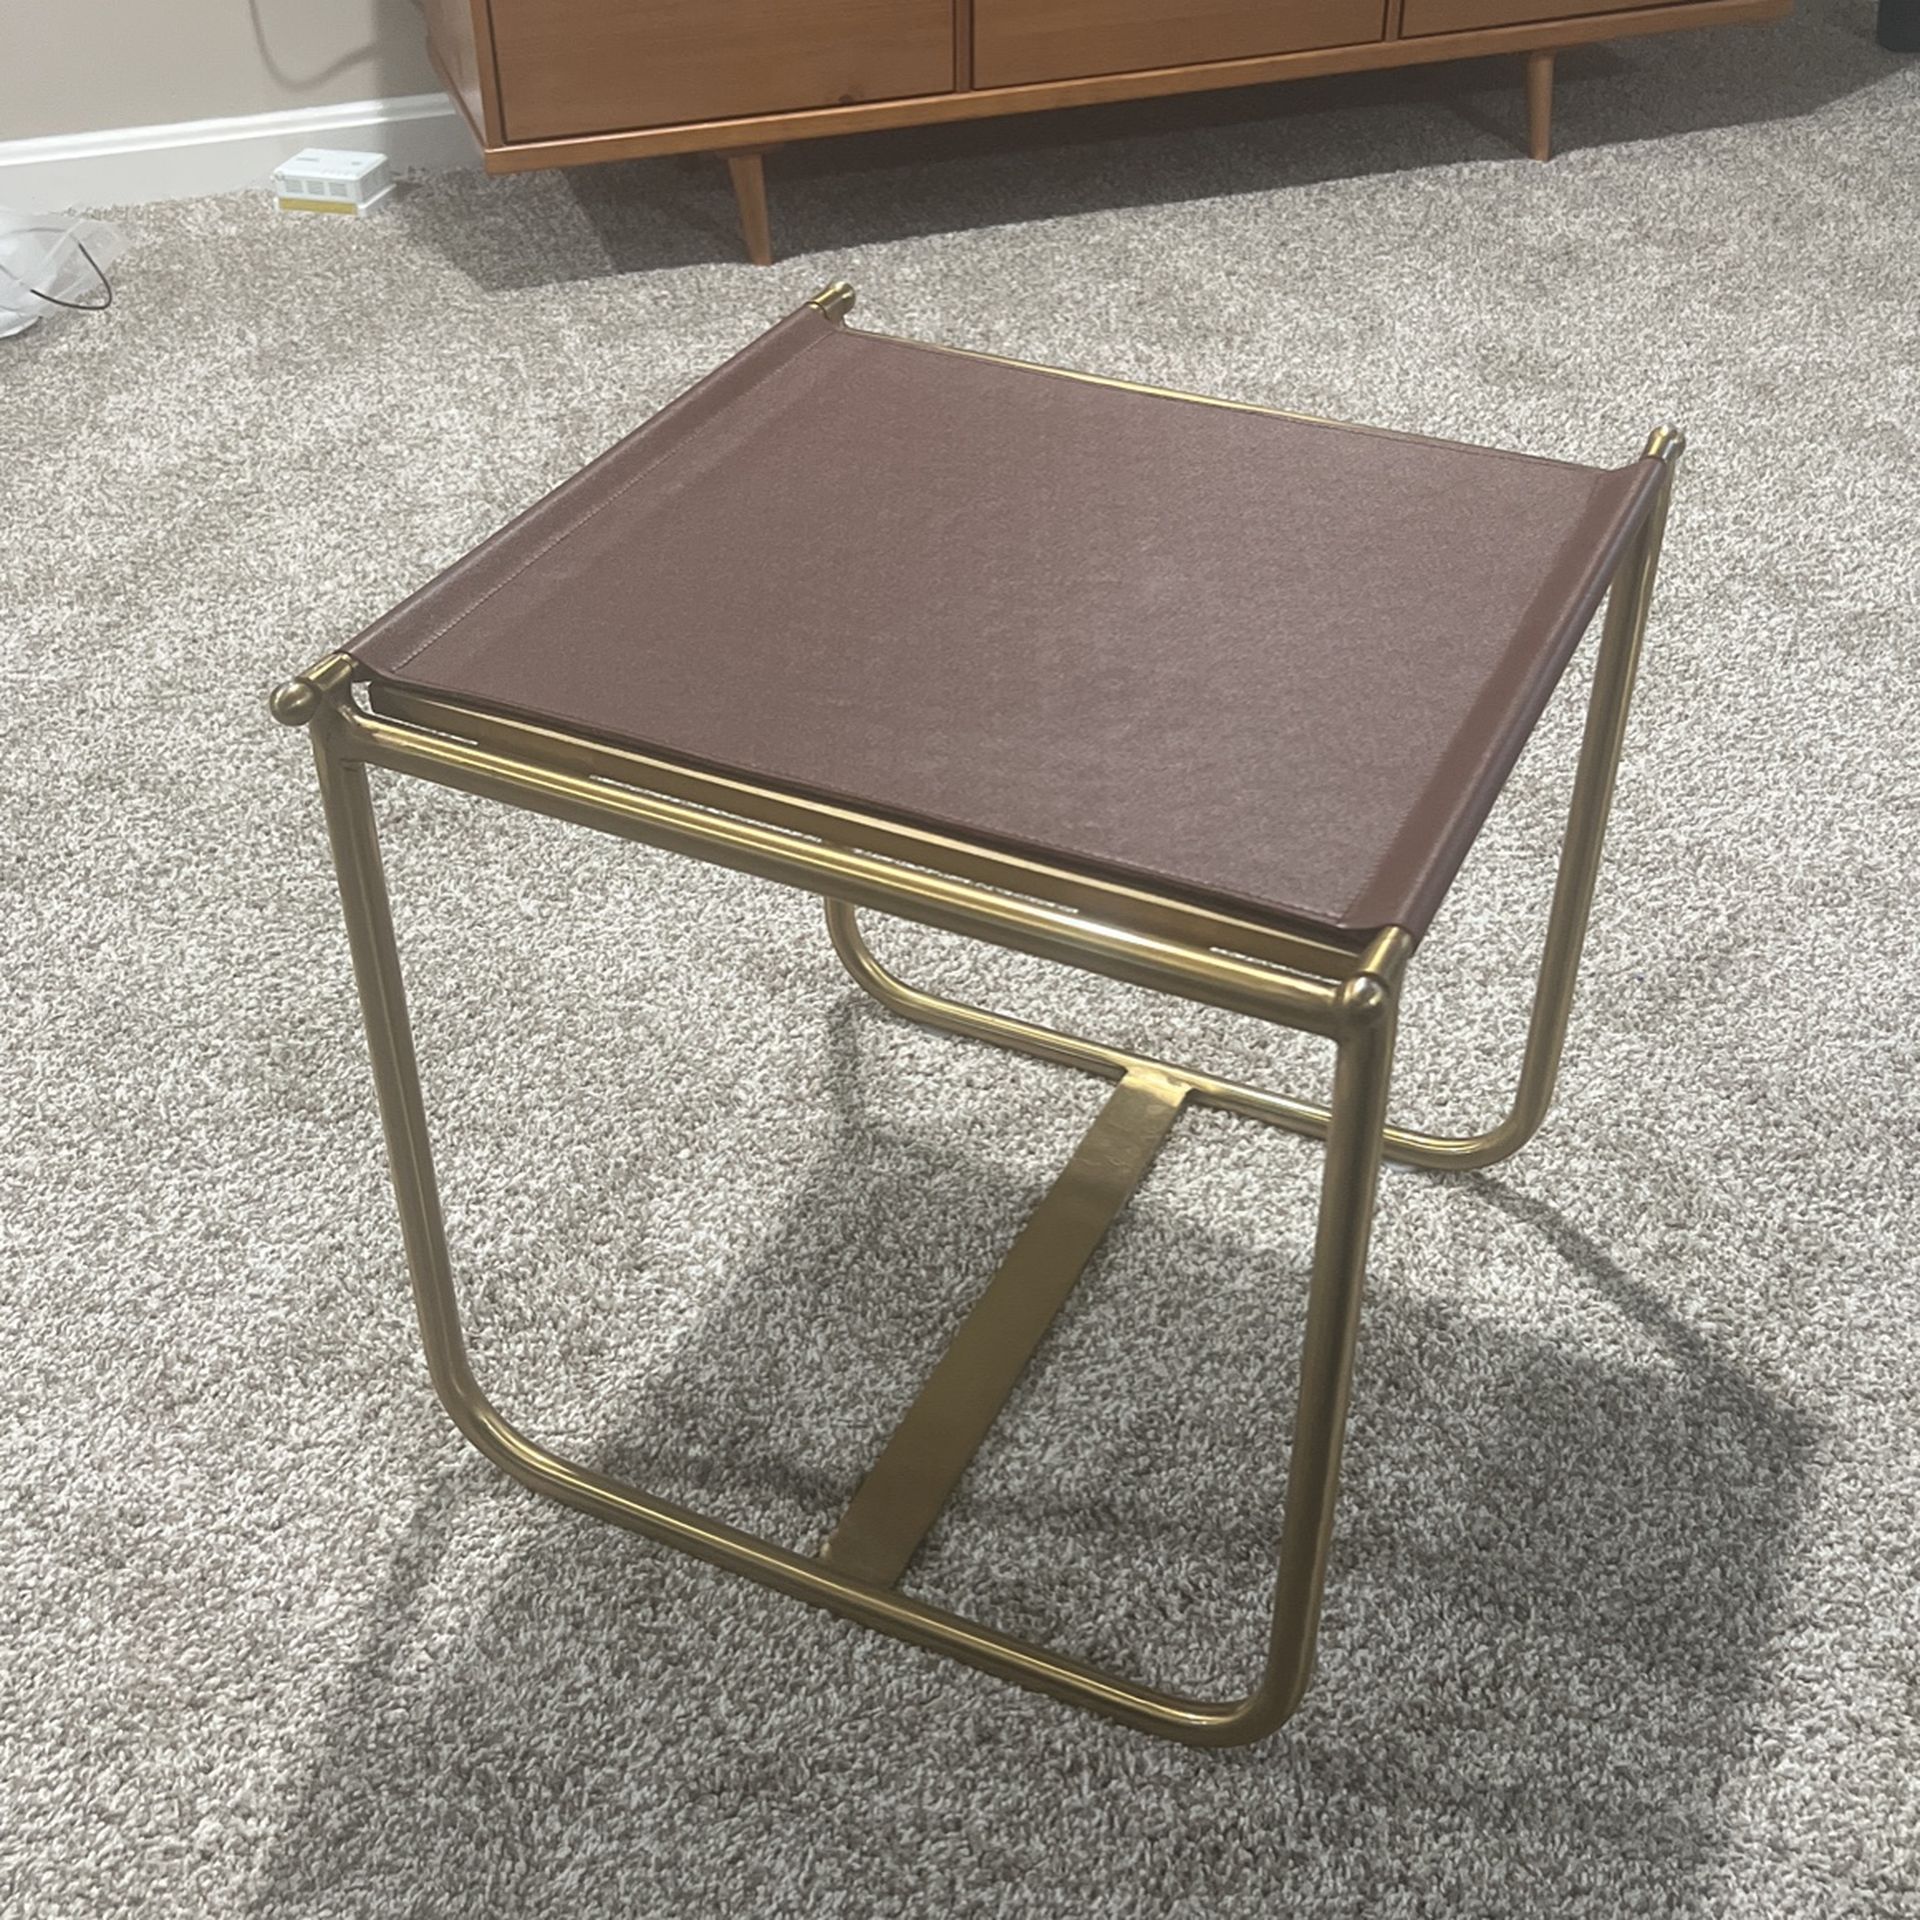 Brown Faux Leather Side Table With Gold Accents